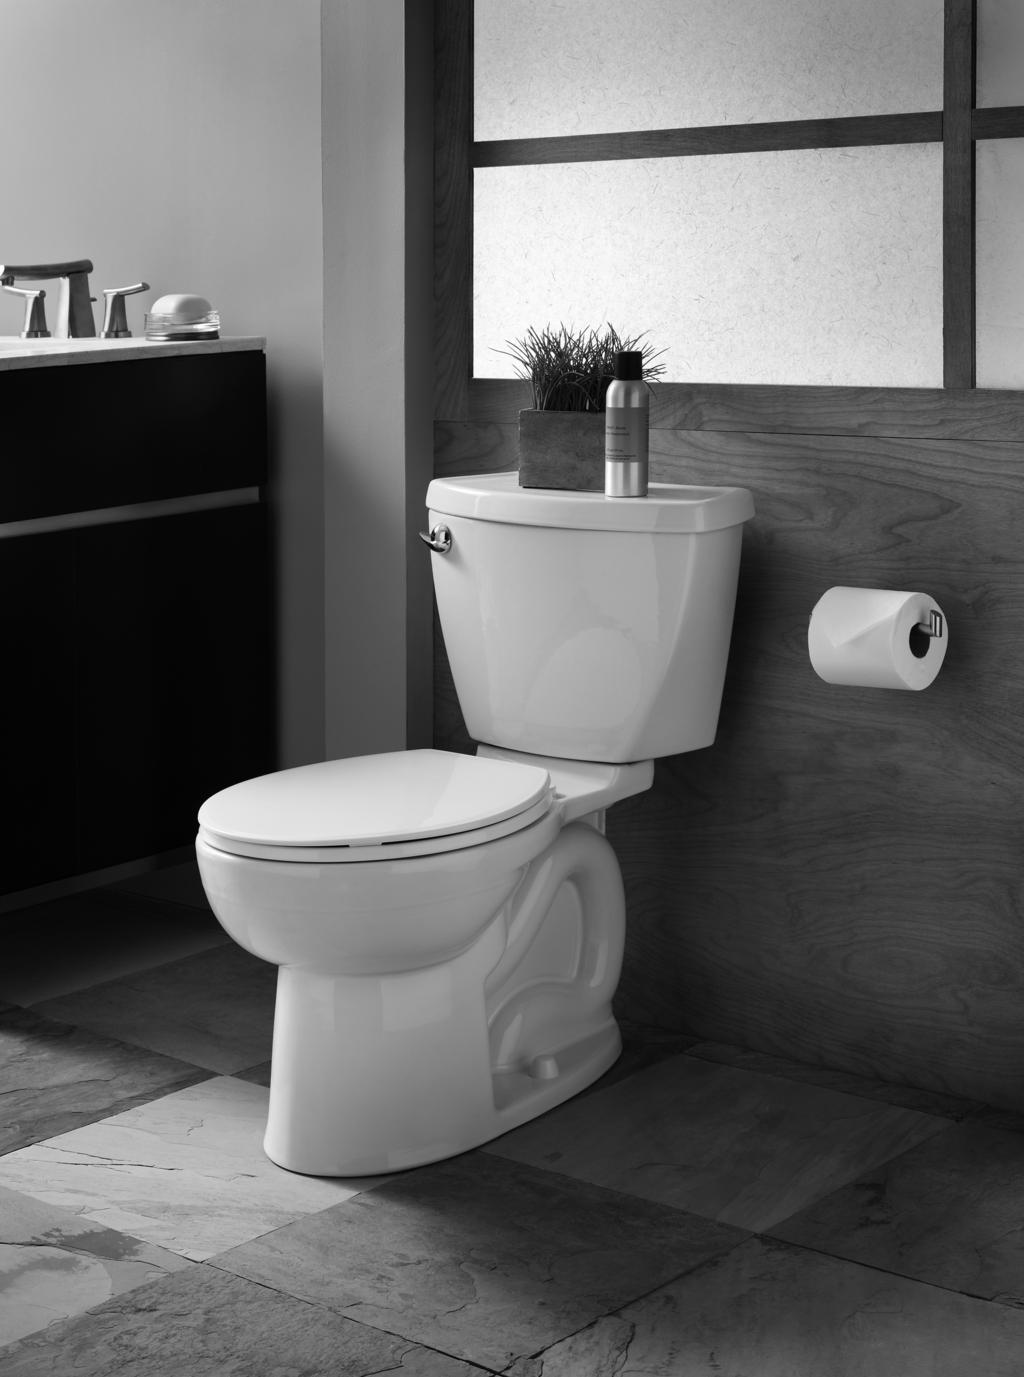 OWNERS MANUAL MANUAL DEL PROPIETARIO Cadet 3 THANK YOU. You have purchased a high performance Cadet 3 toilet featuring some of the latest innovations from American Standard. This high efficiency 1.